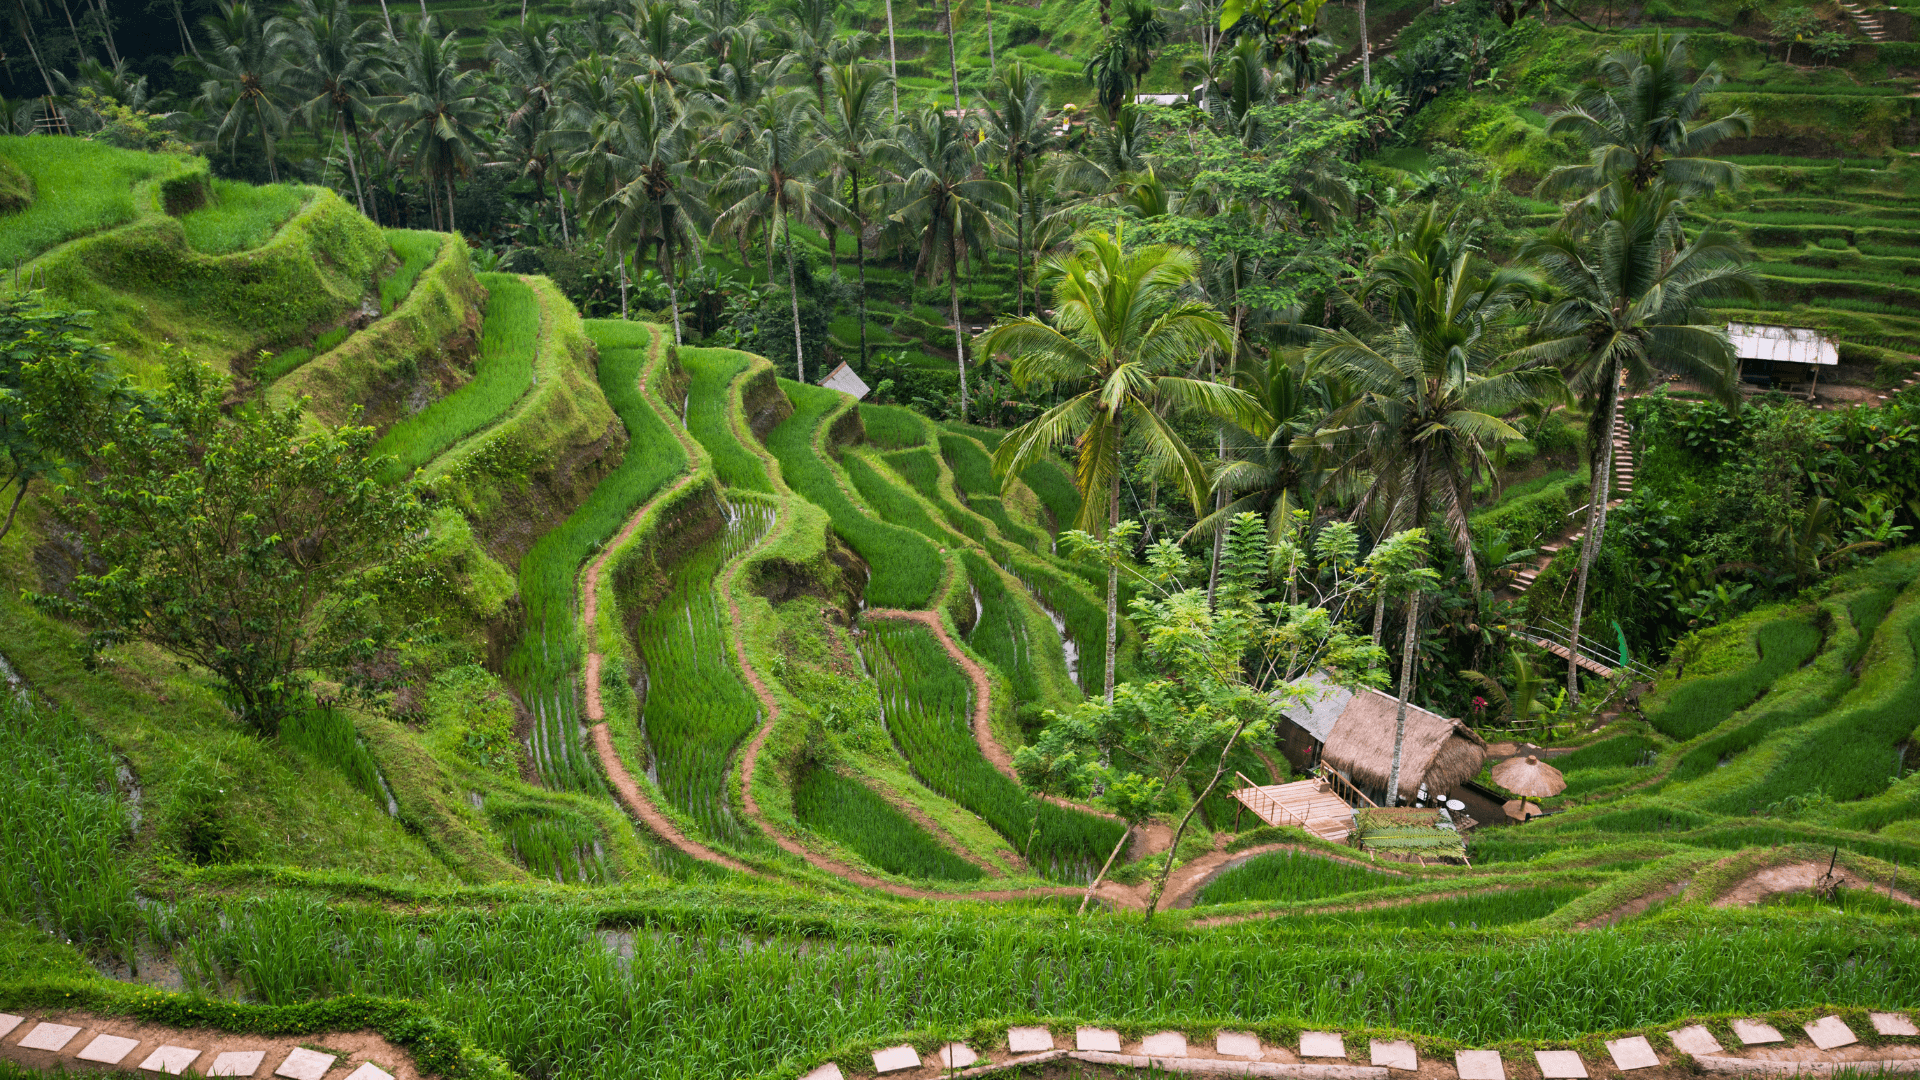 What To Do In Ubud, Bali